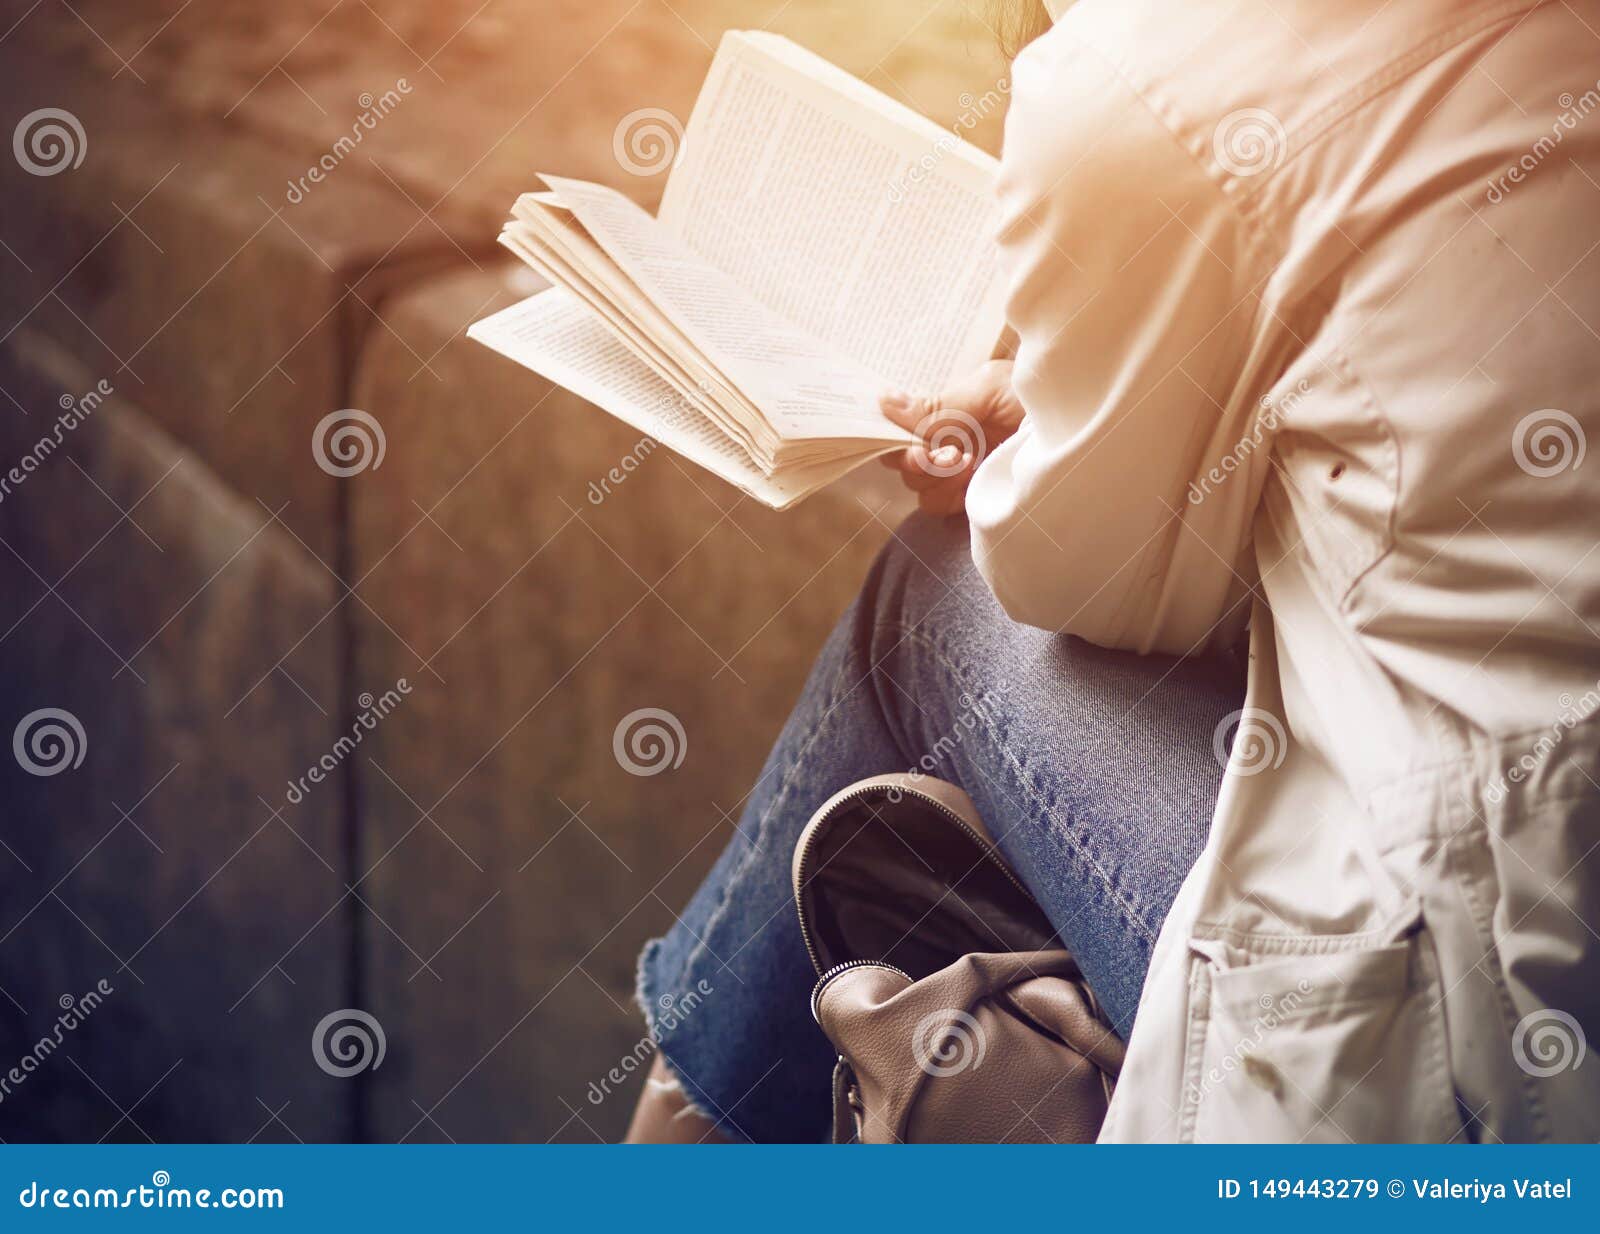 a girl sitting reading classical literature